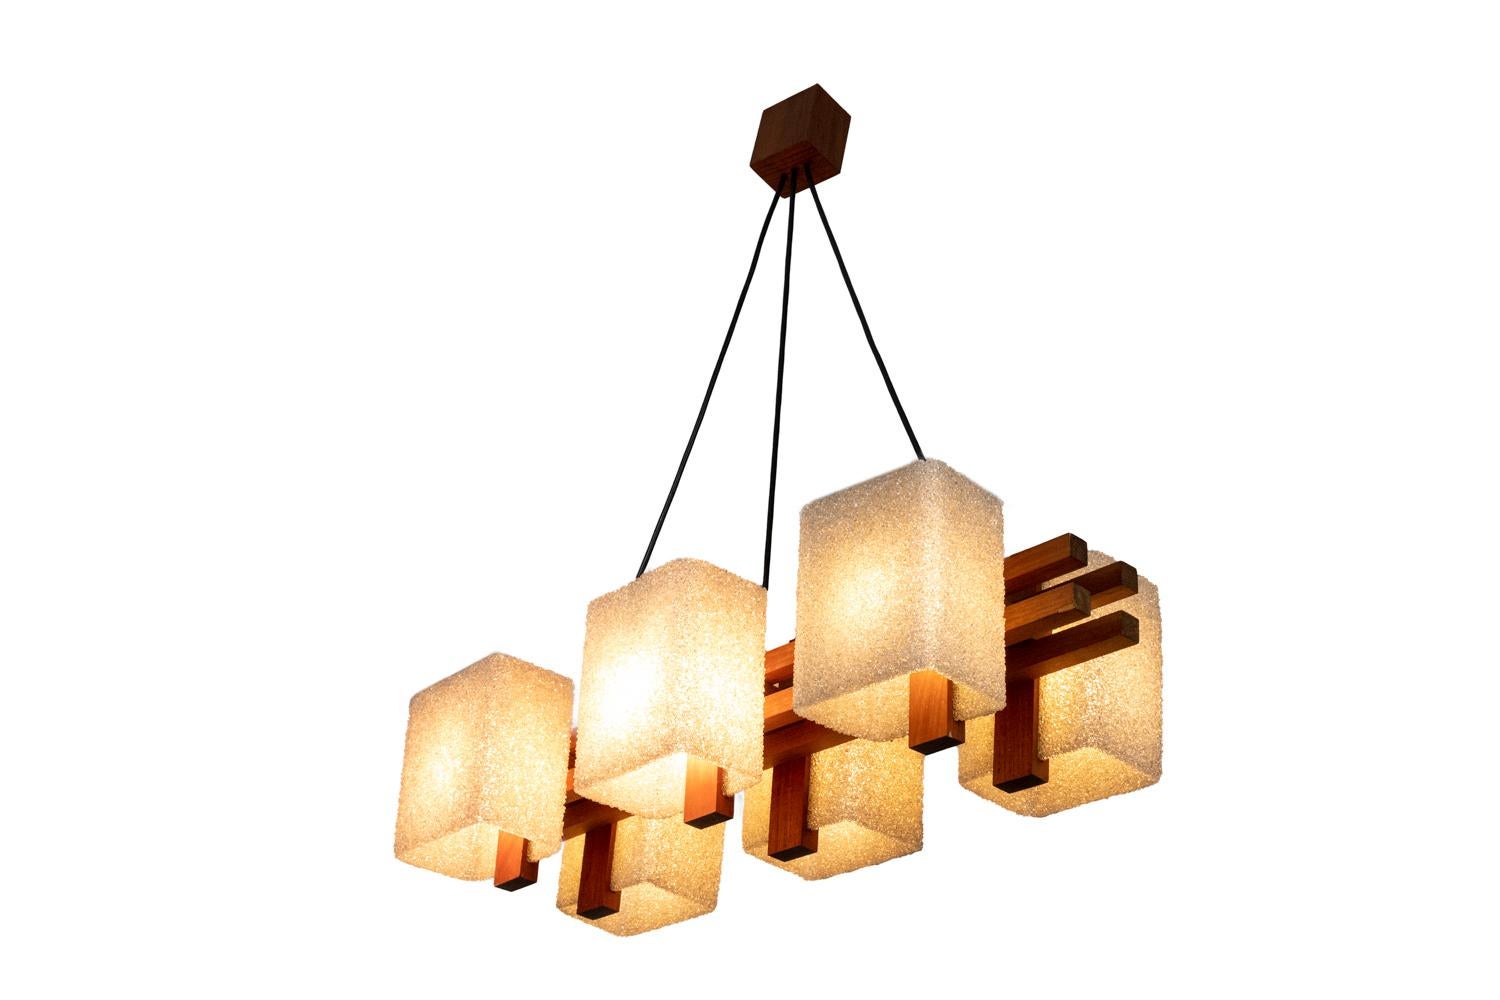 Chandelier in granite resin and wood with six lights. Wood shaft composed by four rectangular shape sticks on which are hung six rectangular shape lampshades. Black wires hung on a wood cylindrical cache-bélière (hide hook).

Work realized in the